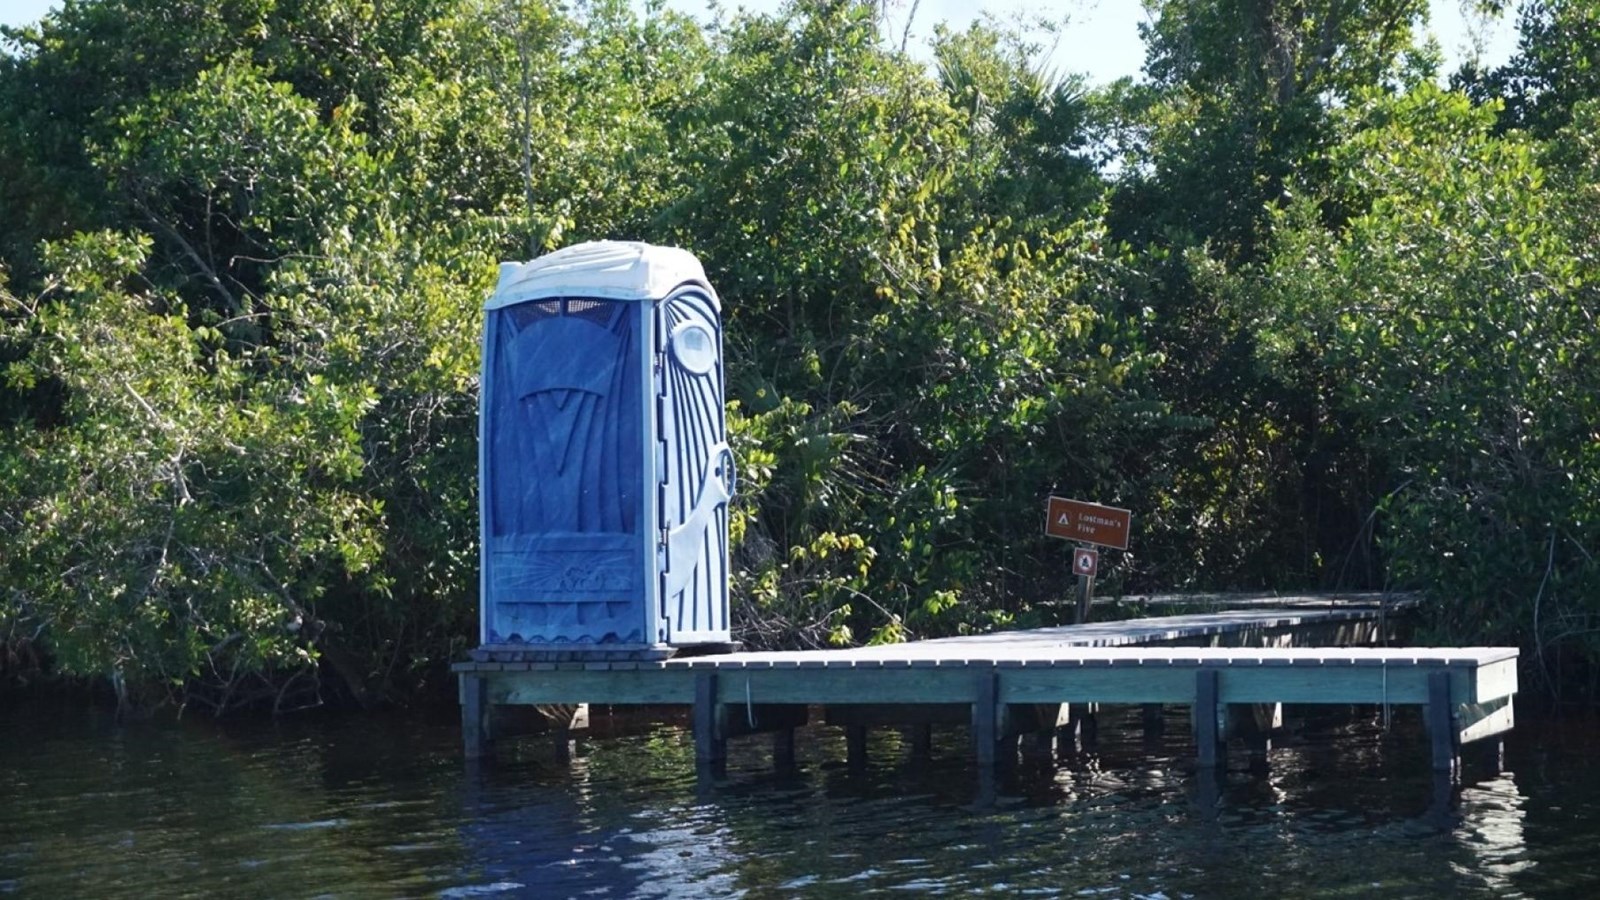 A small dock with a blue vault toilet. A clearing in the vegetation leads to camp clearing